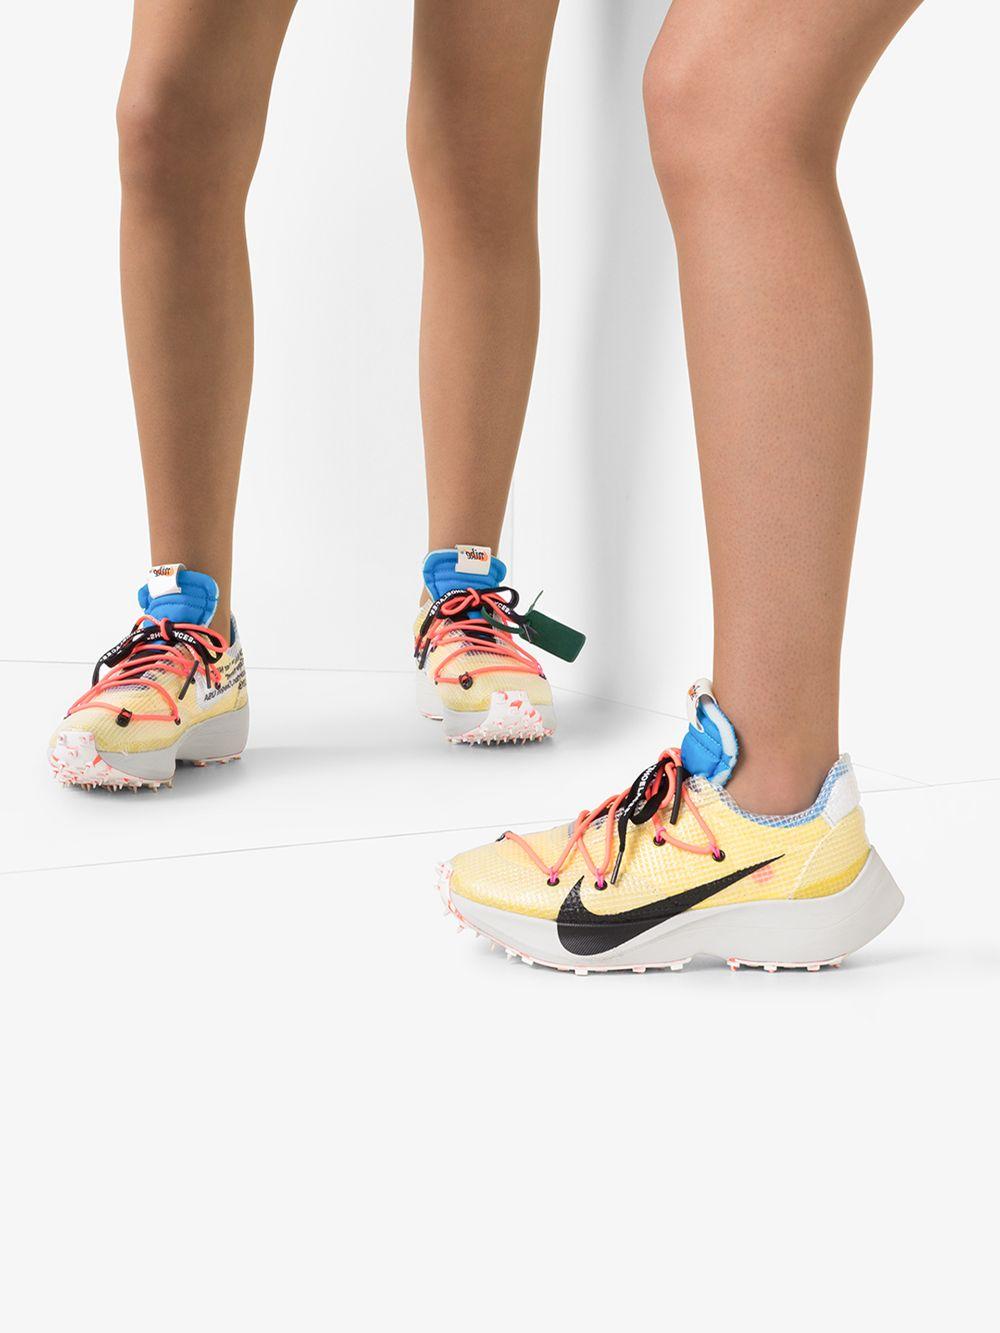 NIKE X OFF-WHITE + Off-white Vapor Street Ripstop, Suede, Mesh And 